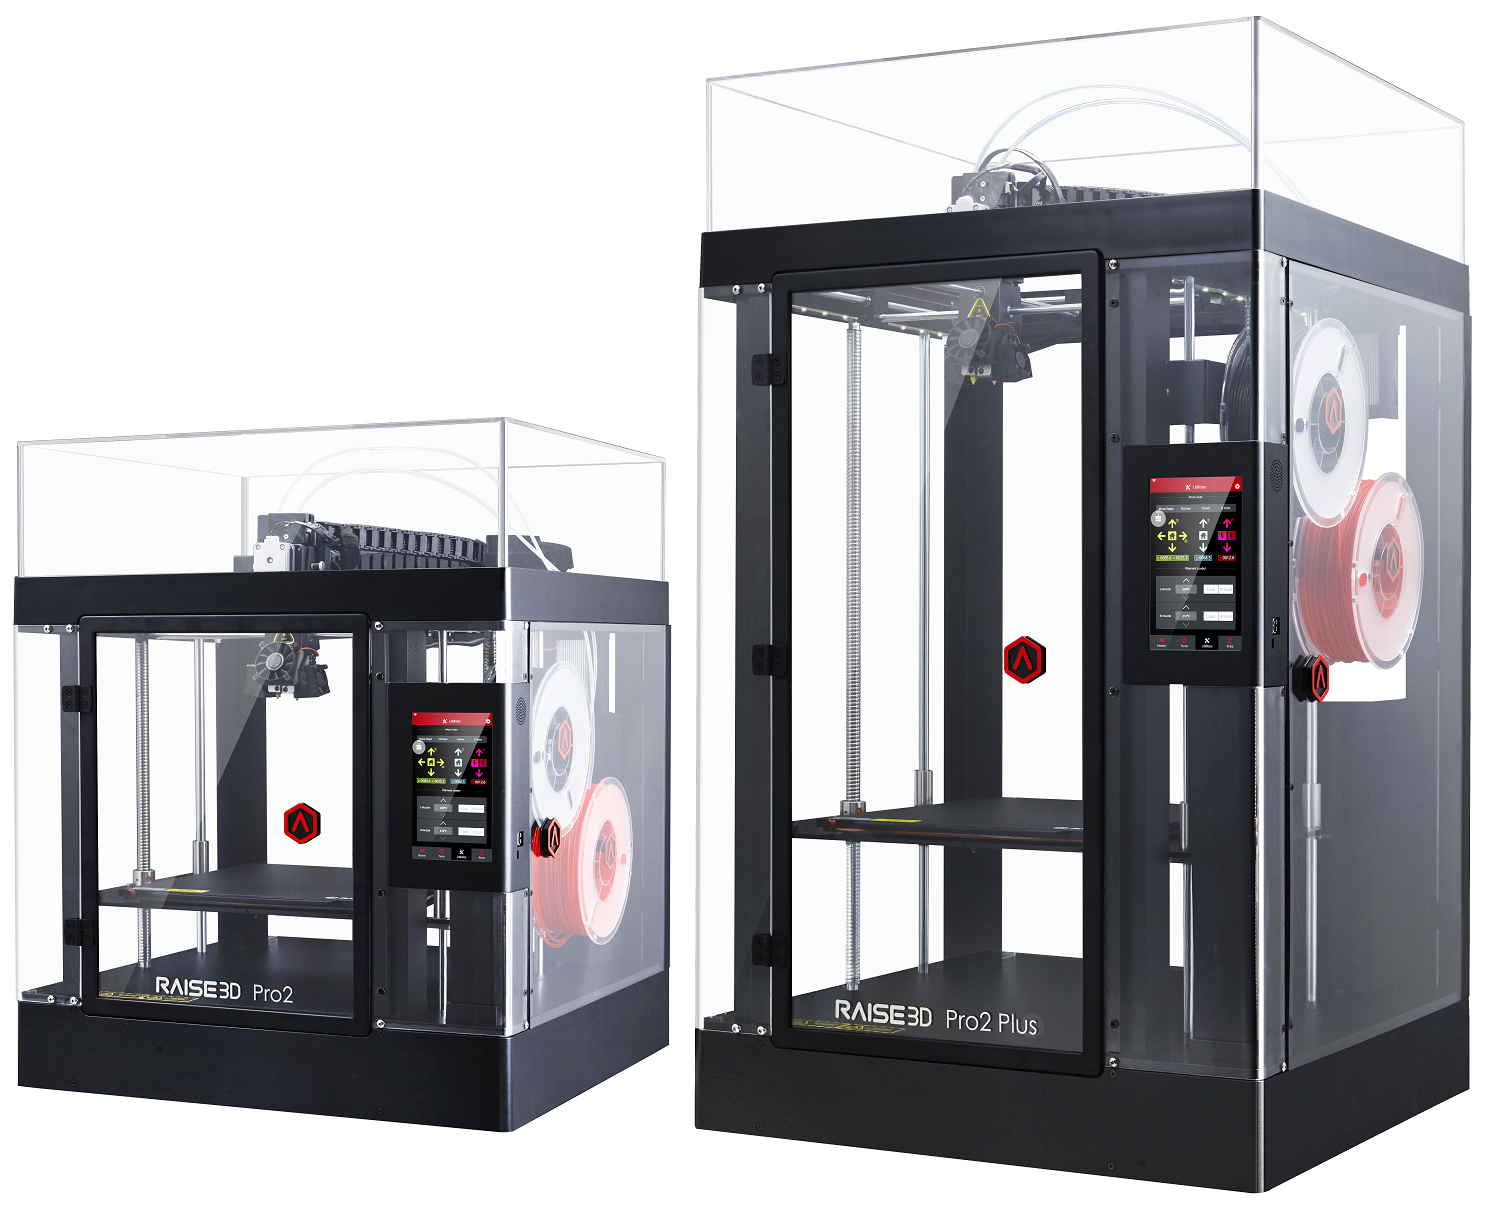 Industrial 3D printers for flexible manufacturing